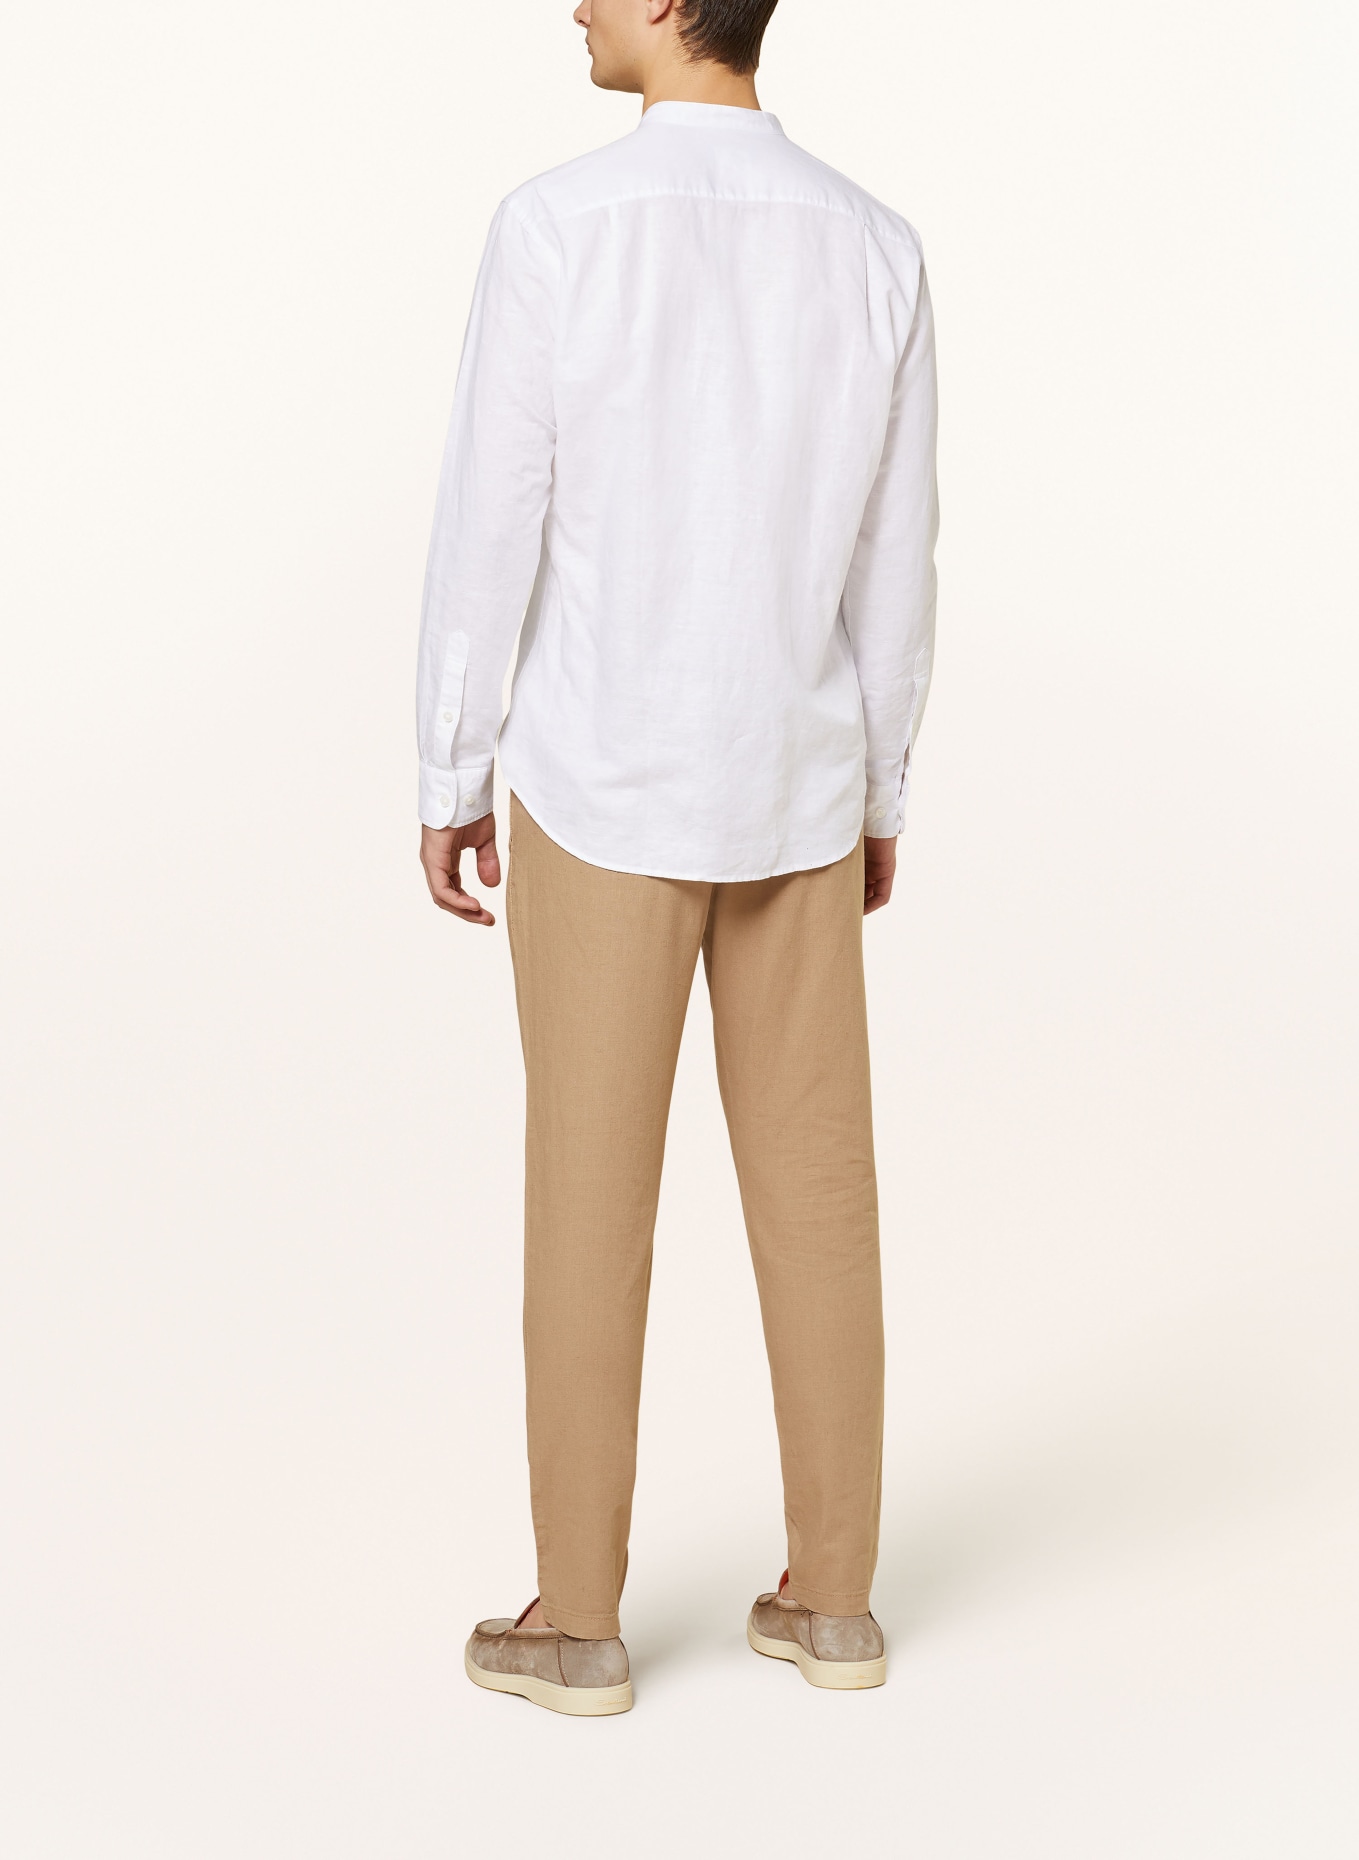 STROKESMAN'S Shirt regular fit with linen, Color: WHITE (Image 3)